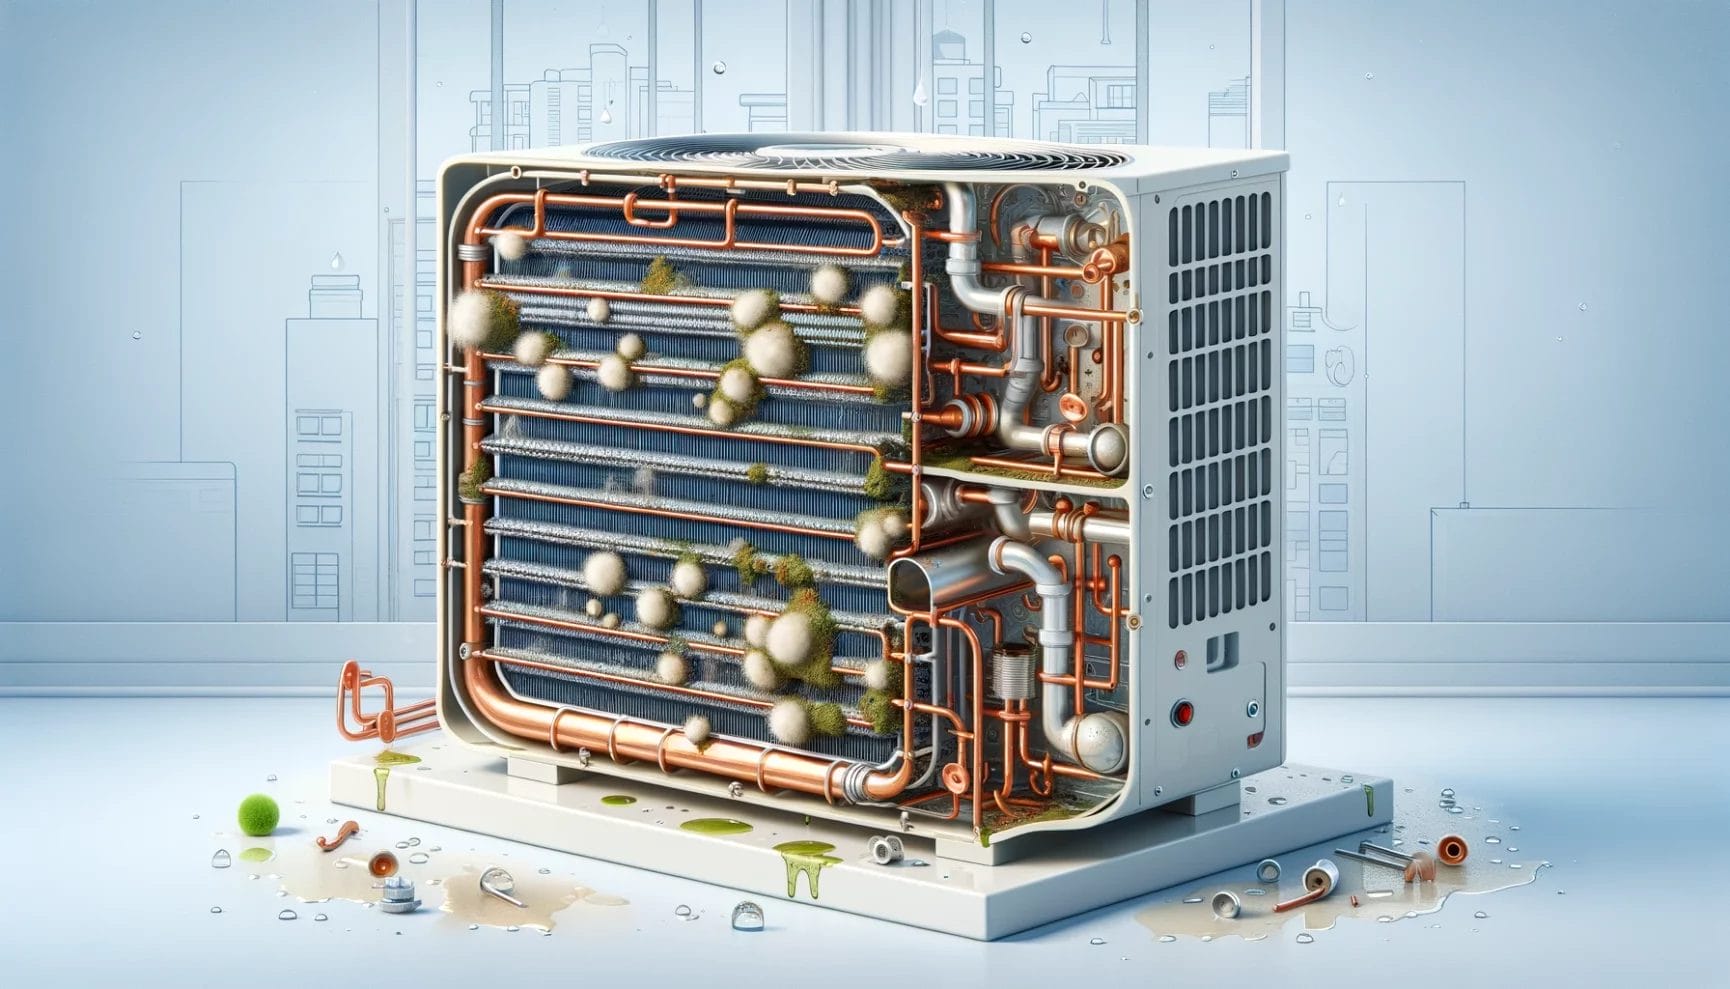 Illustration of an air conditioner unit with a cutaway view revealing the internal components and piping system.